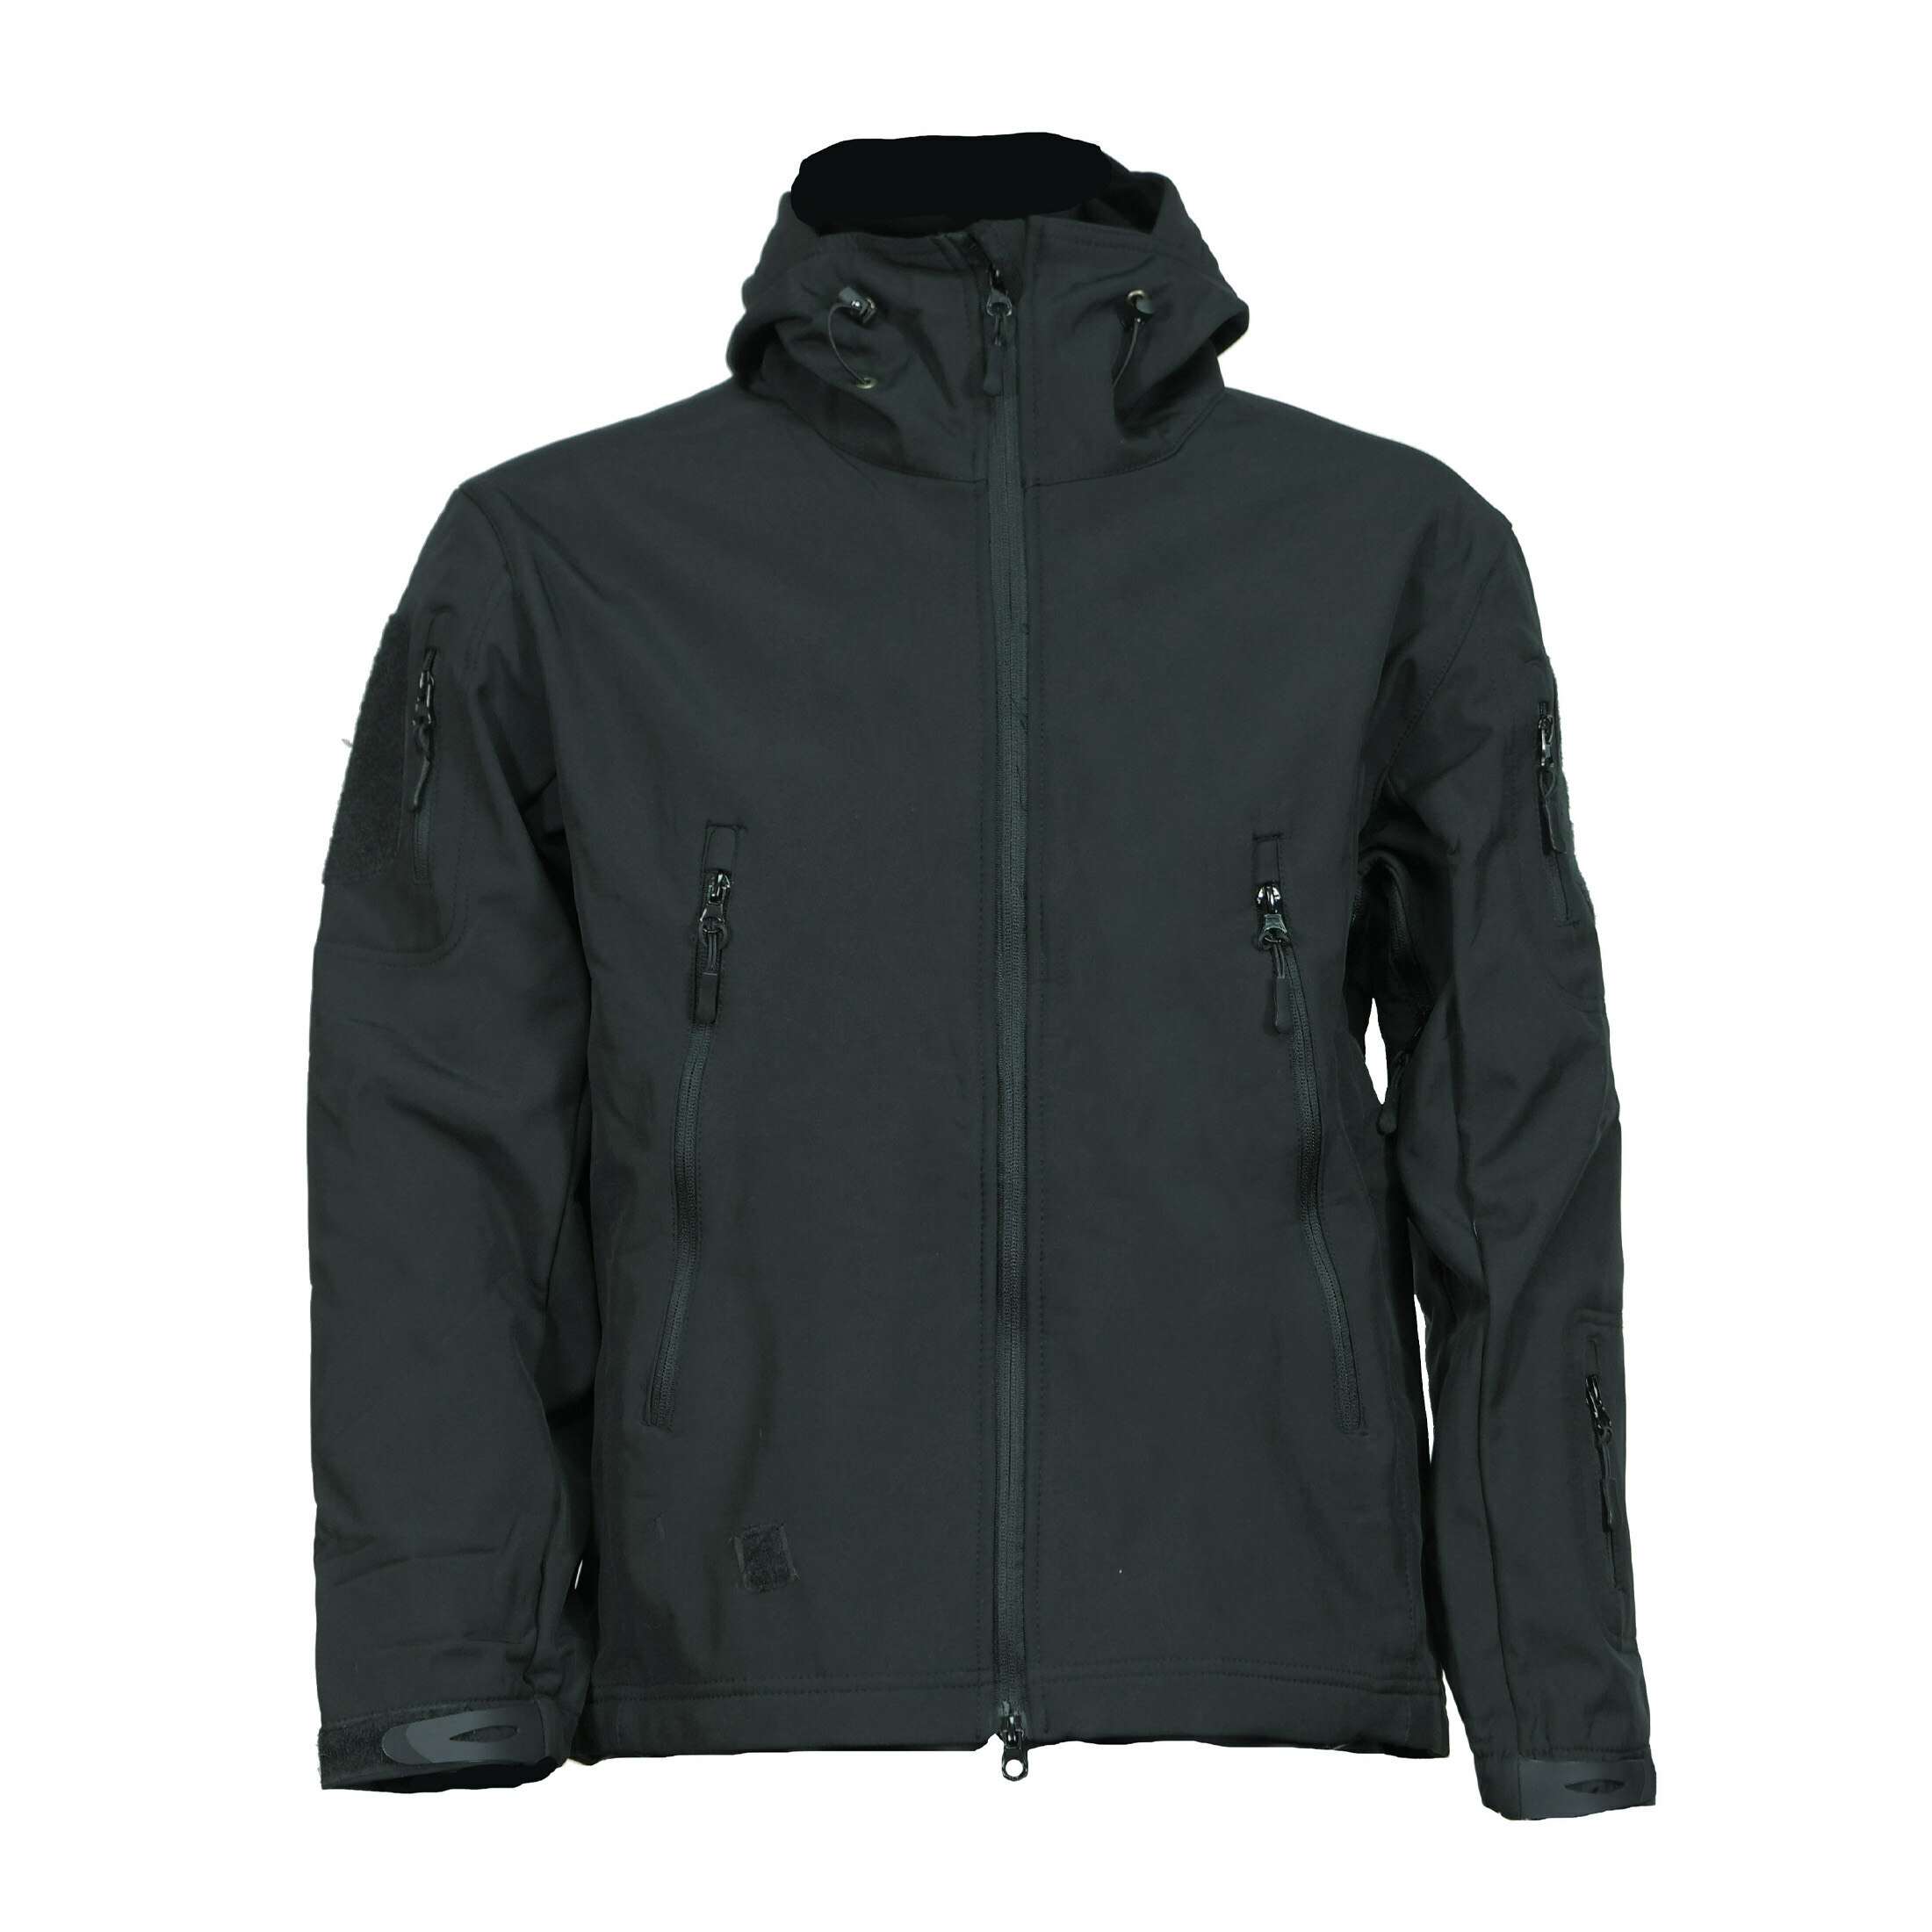 Holosun Bekleidung HS-SOFTSHELL-TACTICAL-XS